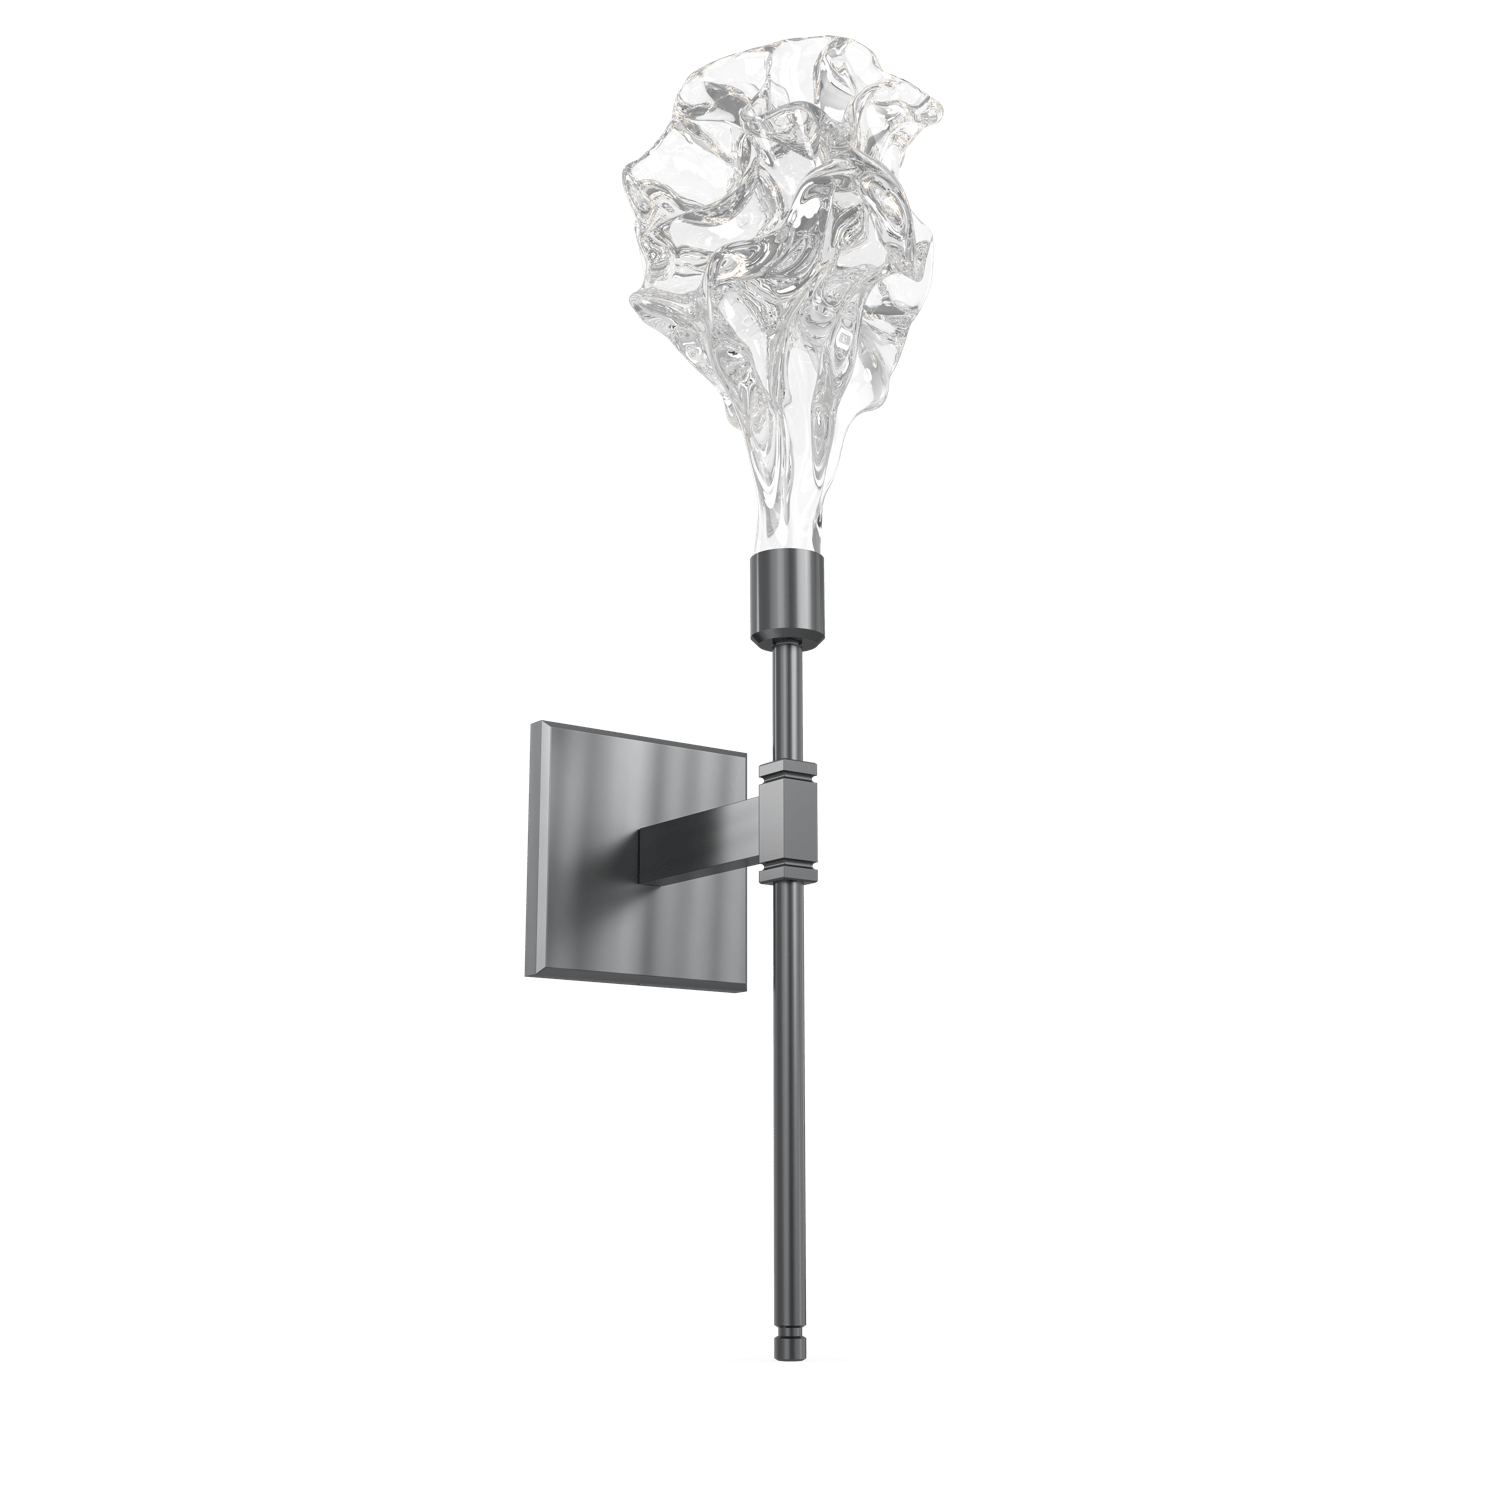 IDB0059-21-GM-Hammerton-Studio-Blossom-belvedere-wall-sconce-with-gunmetal-finish-and-clear-handblown-crystal-glass-shades-and-LED-lamping